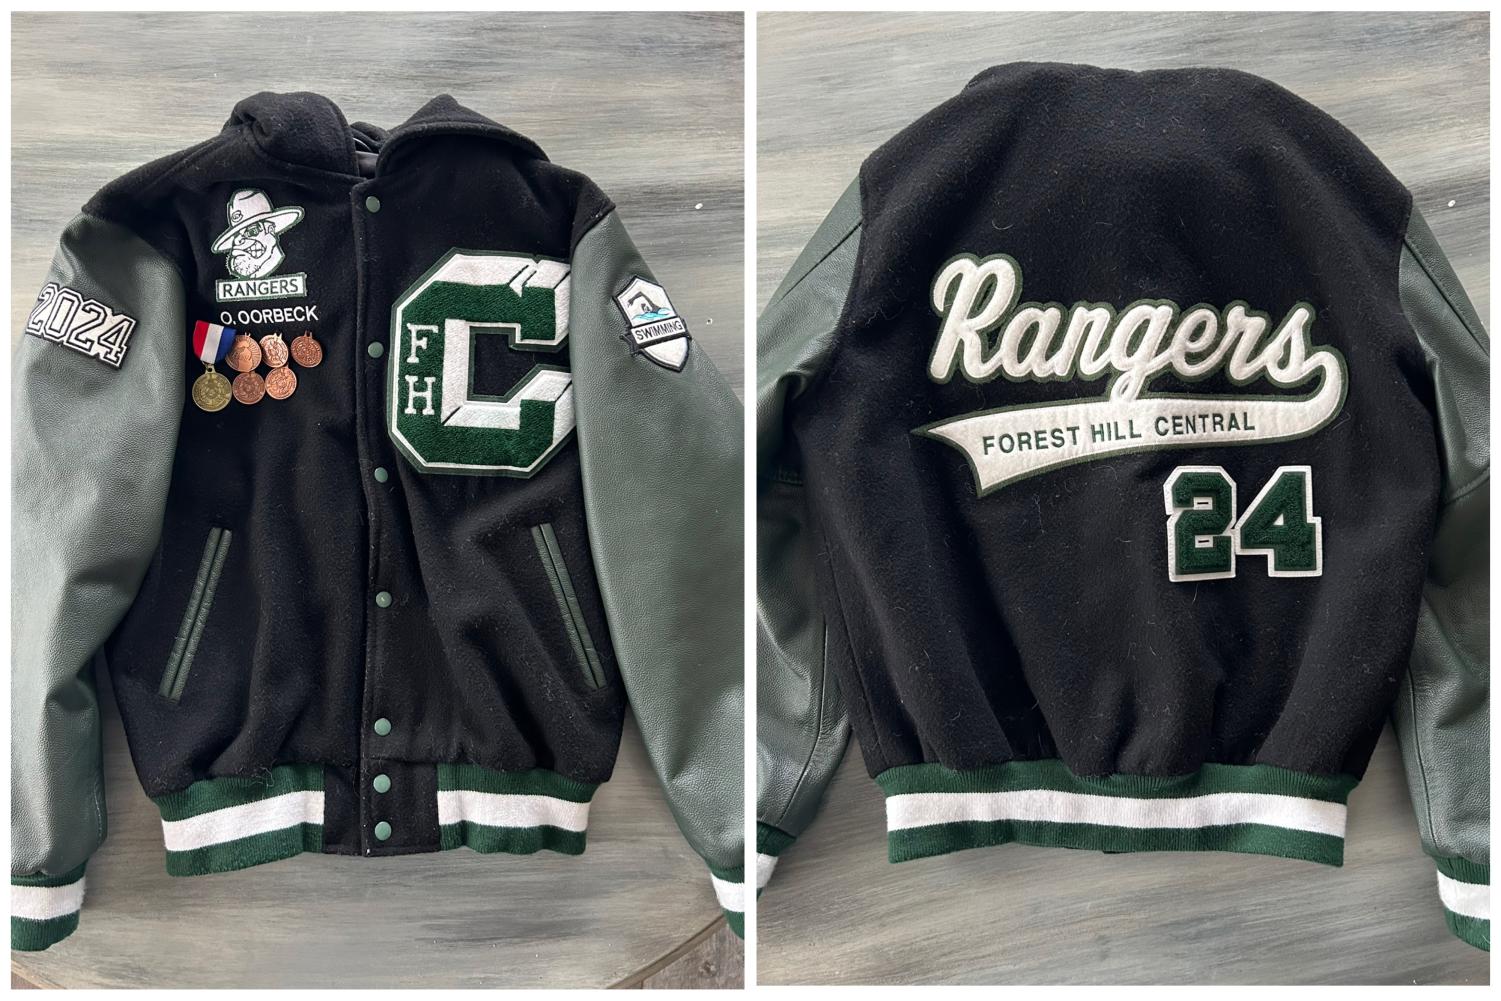 Spring Fashion: Now Back to Back, the Varsity Jacket - The New